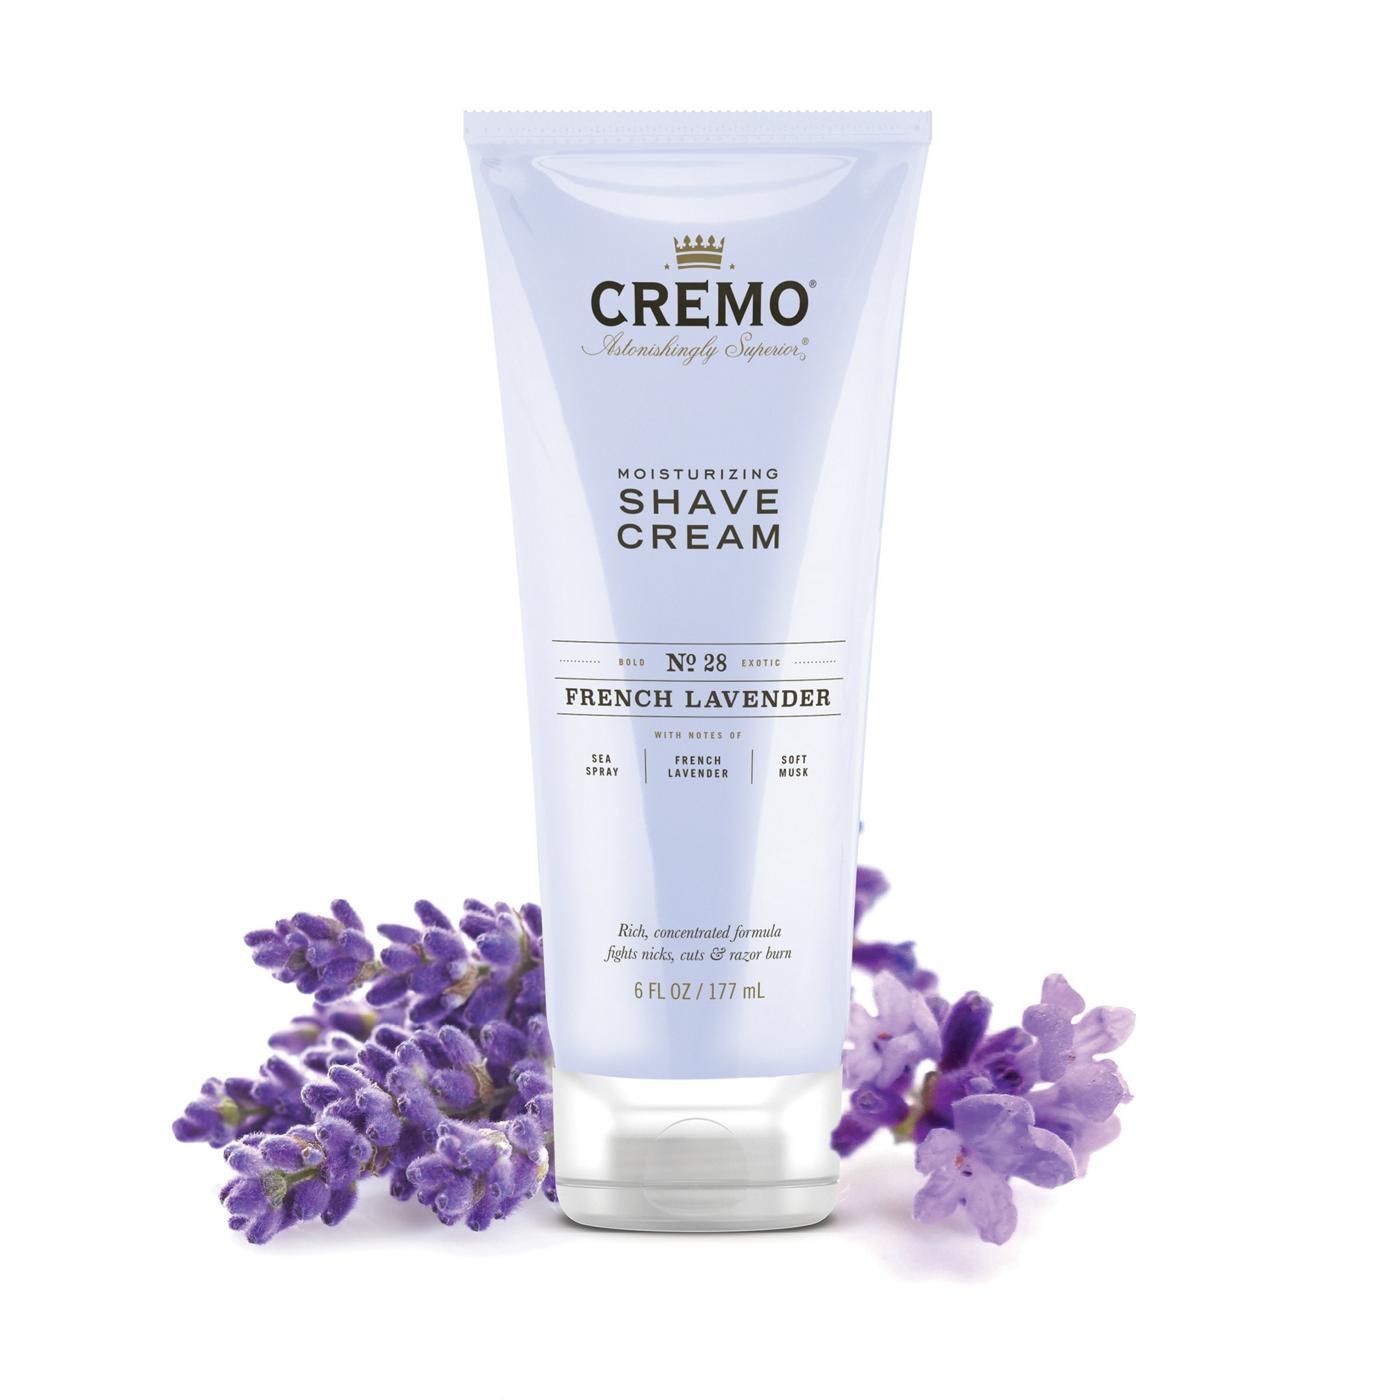 Cremo Shave Cream - French Lavender; image 4 of 7